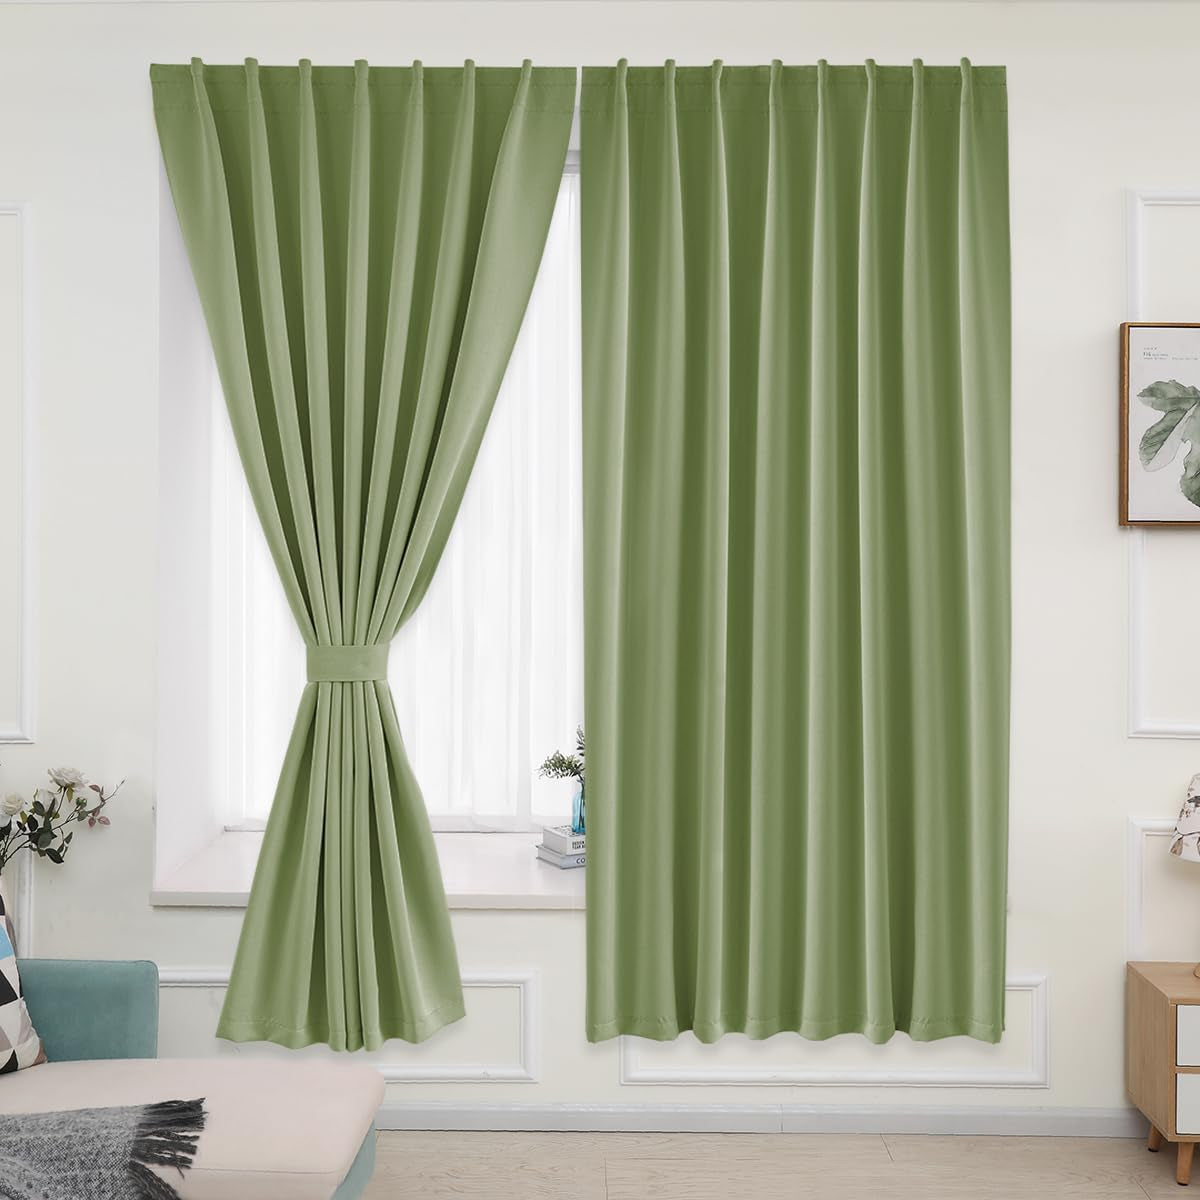 Muamar 2Pcs Blackout Curtains Privacy Curtains 63 Inch Length Window Curtains,Easy Install Thermal Insulated Window Shades,Stick Curtains No Rods, Black 42" W X 63" L  Muamar Sage Green 42"W X 84"L 